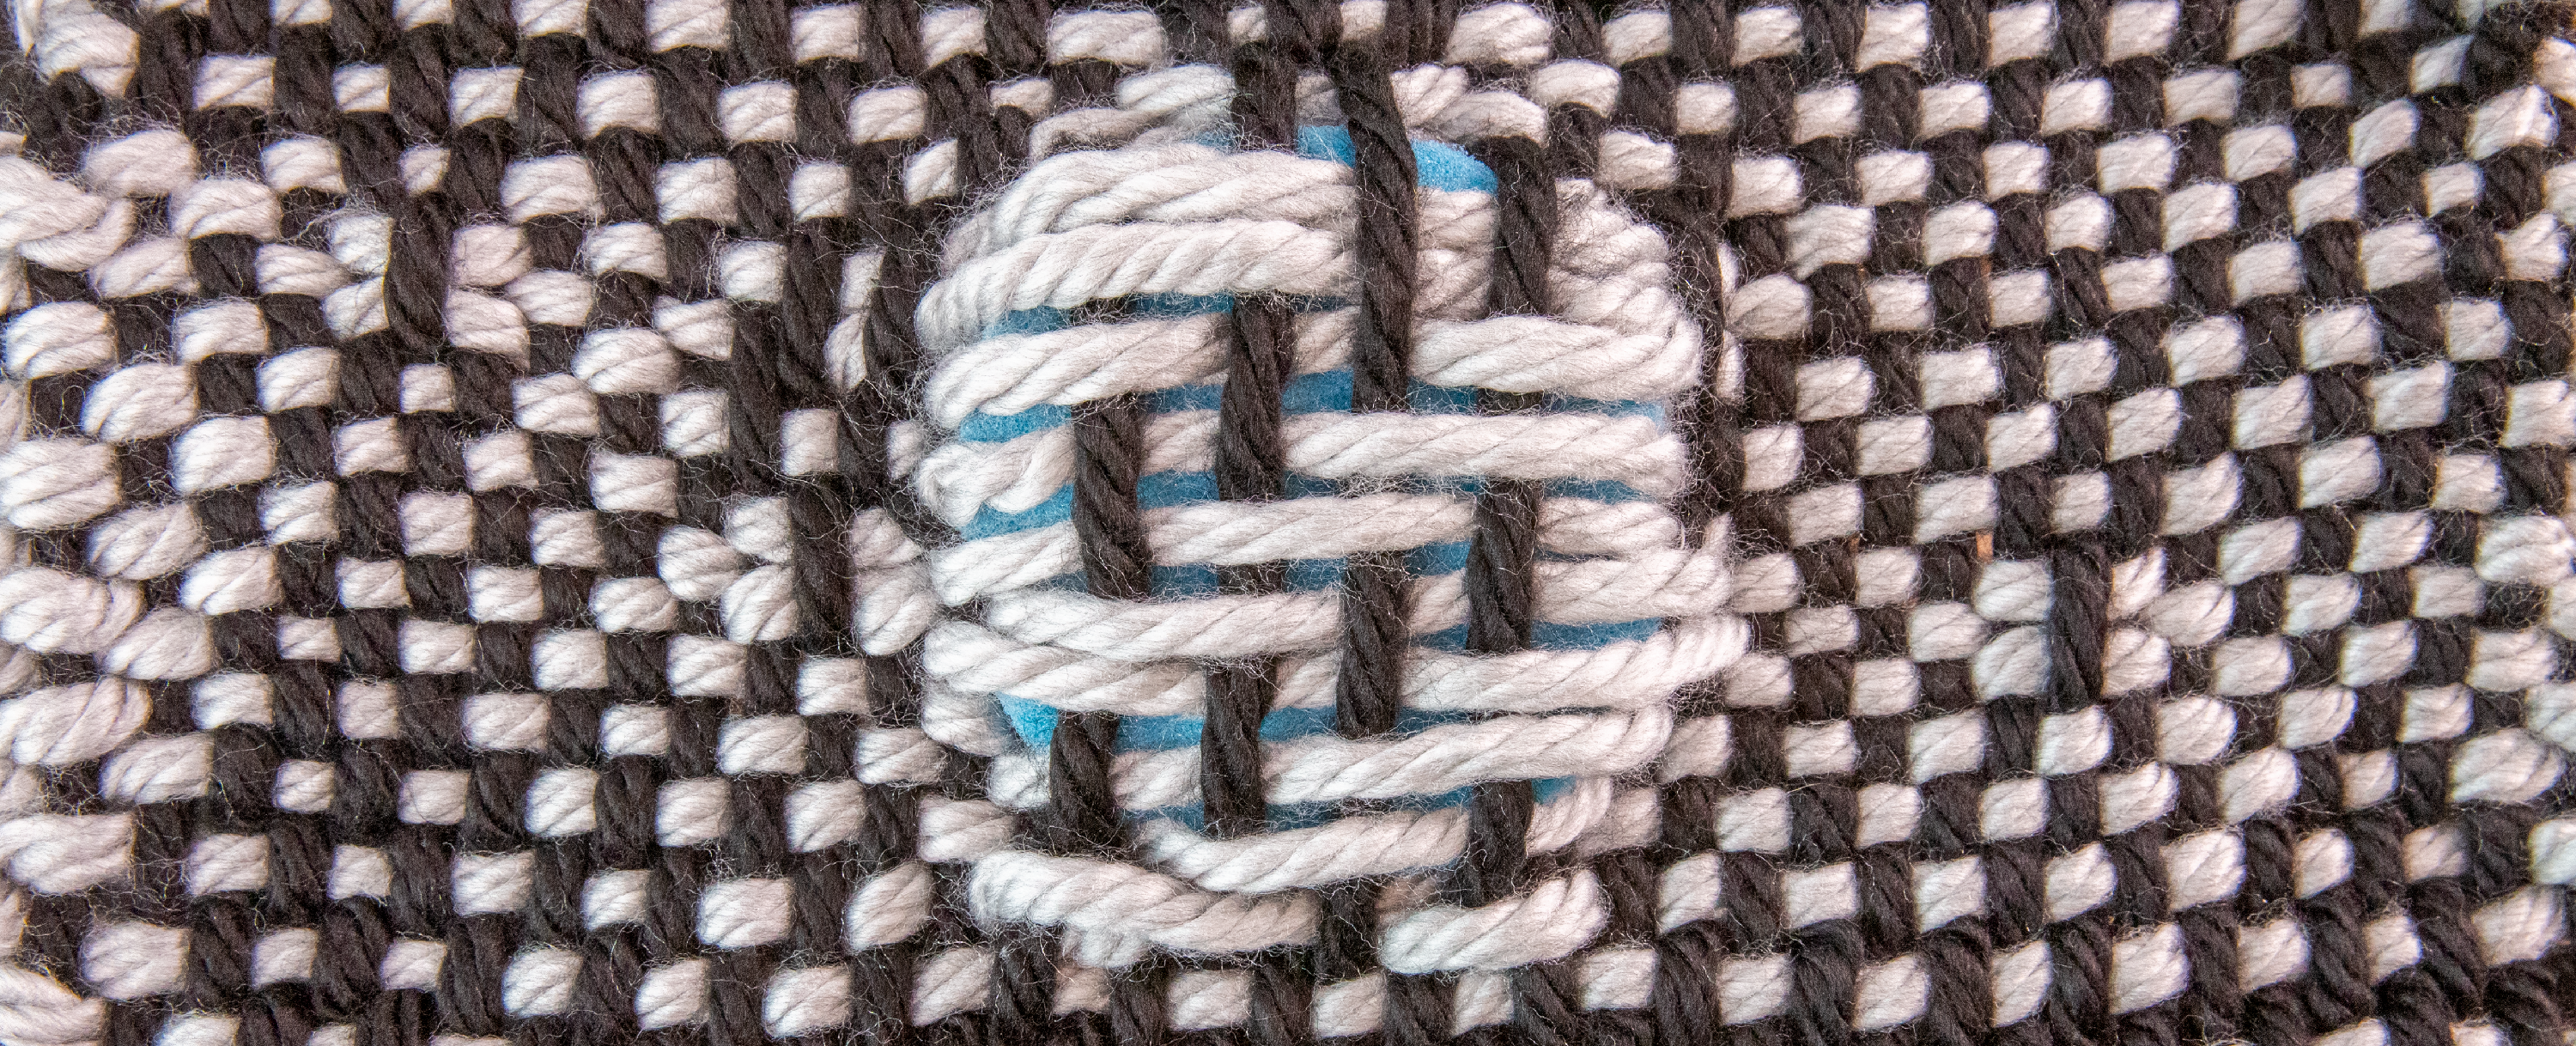 Double-woven fabric containing a foam disc.